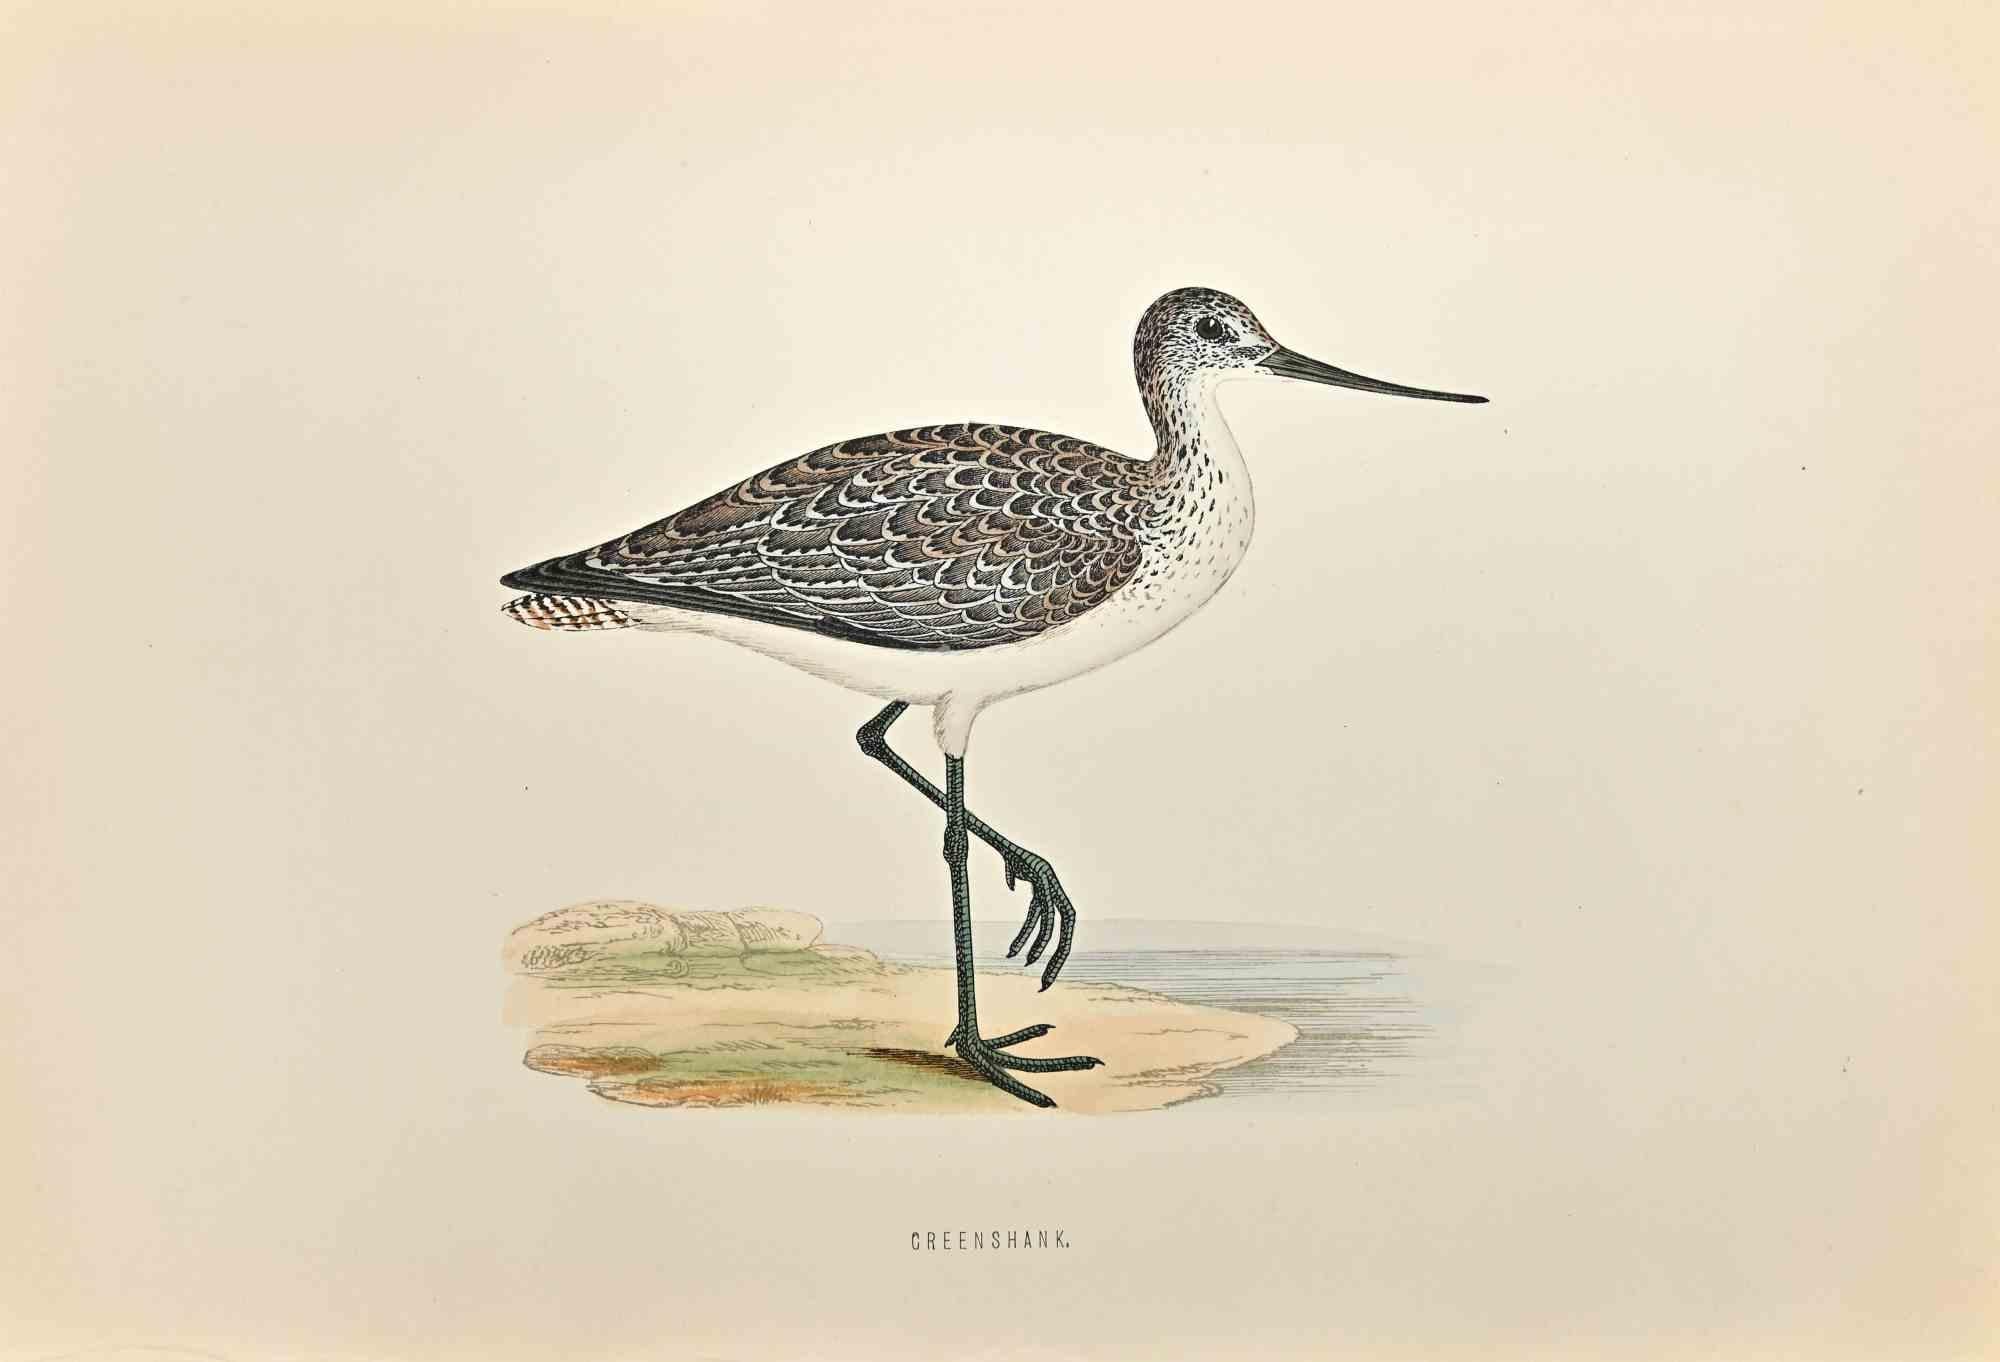 Greenshank is a modern artwork realized in 1870 by the British artist Alexander Francis Lydon (1836-1917) . 

Woodcut print, hand colored, published by London, Bell & Sons, 1870.  Name of the bird printed in plate. This work is part of a print suite